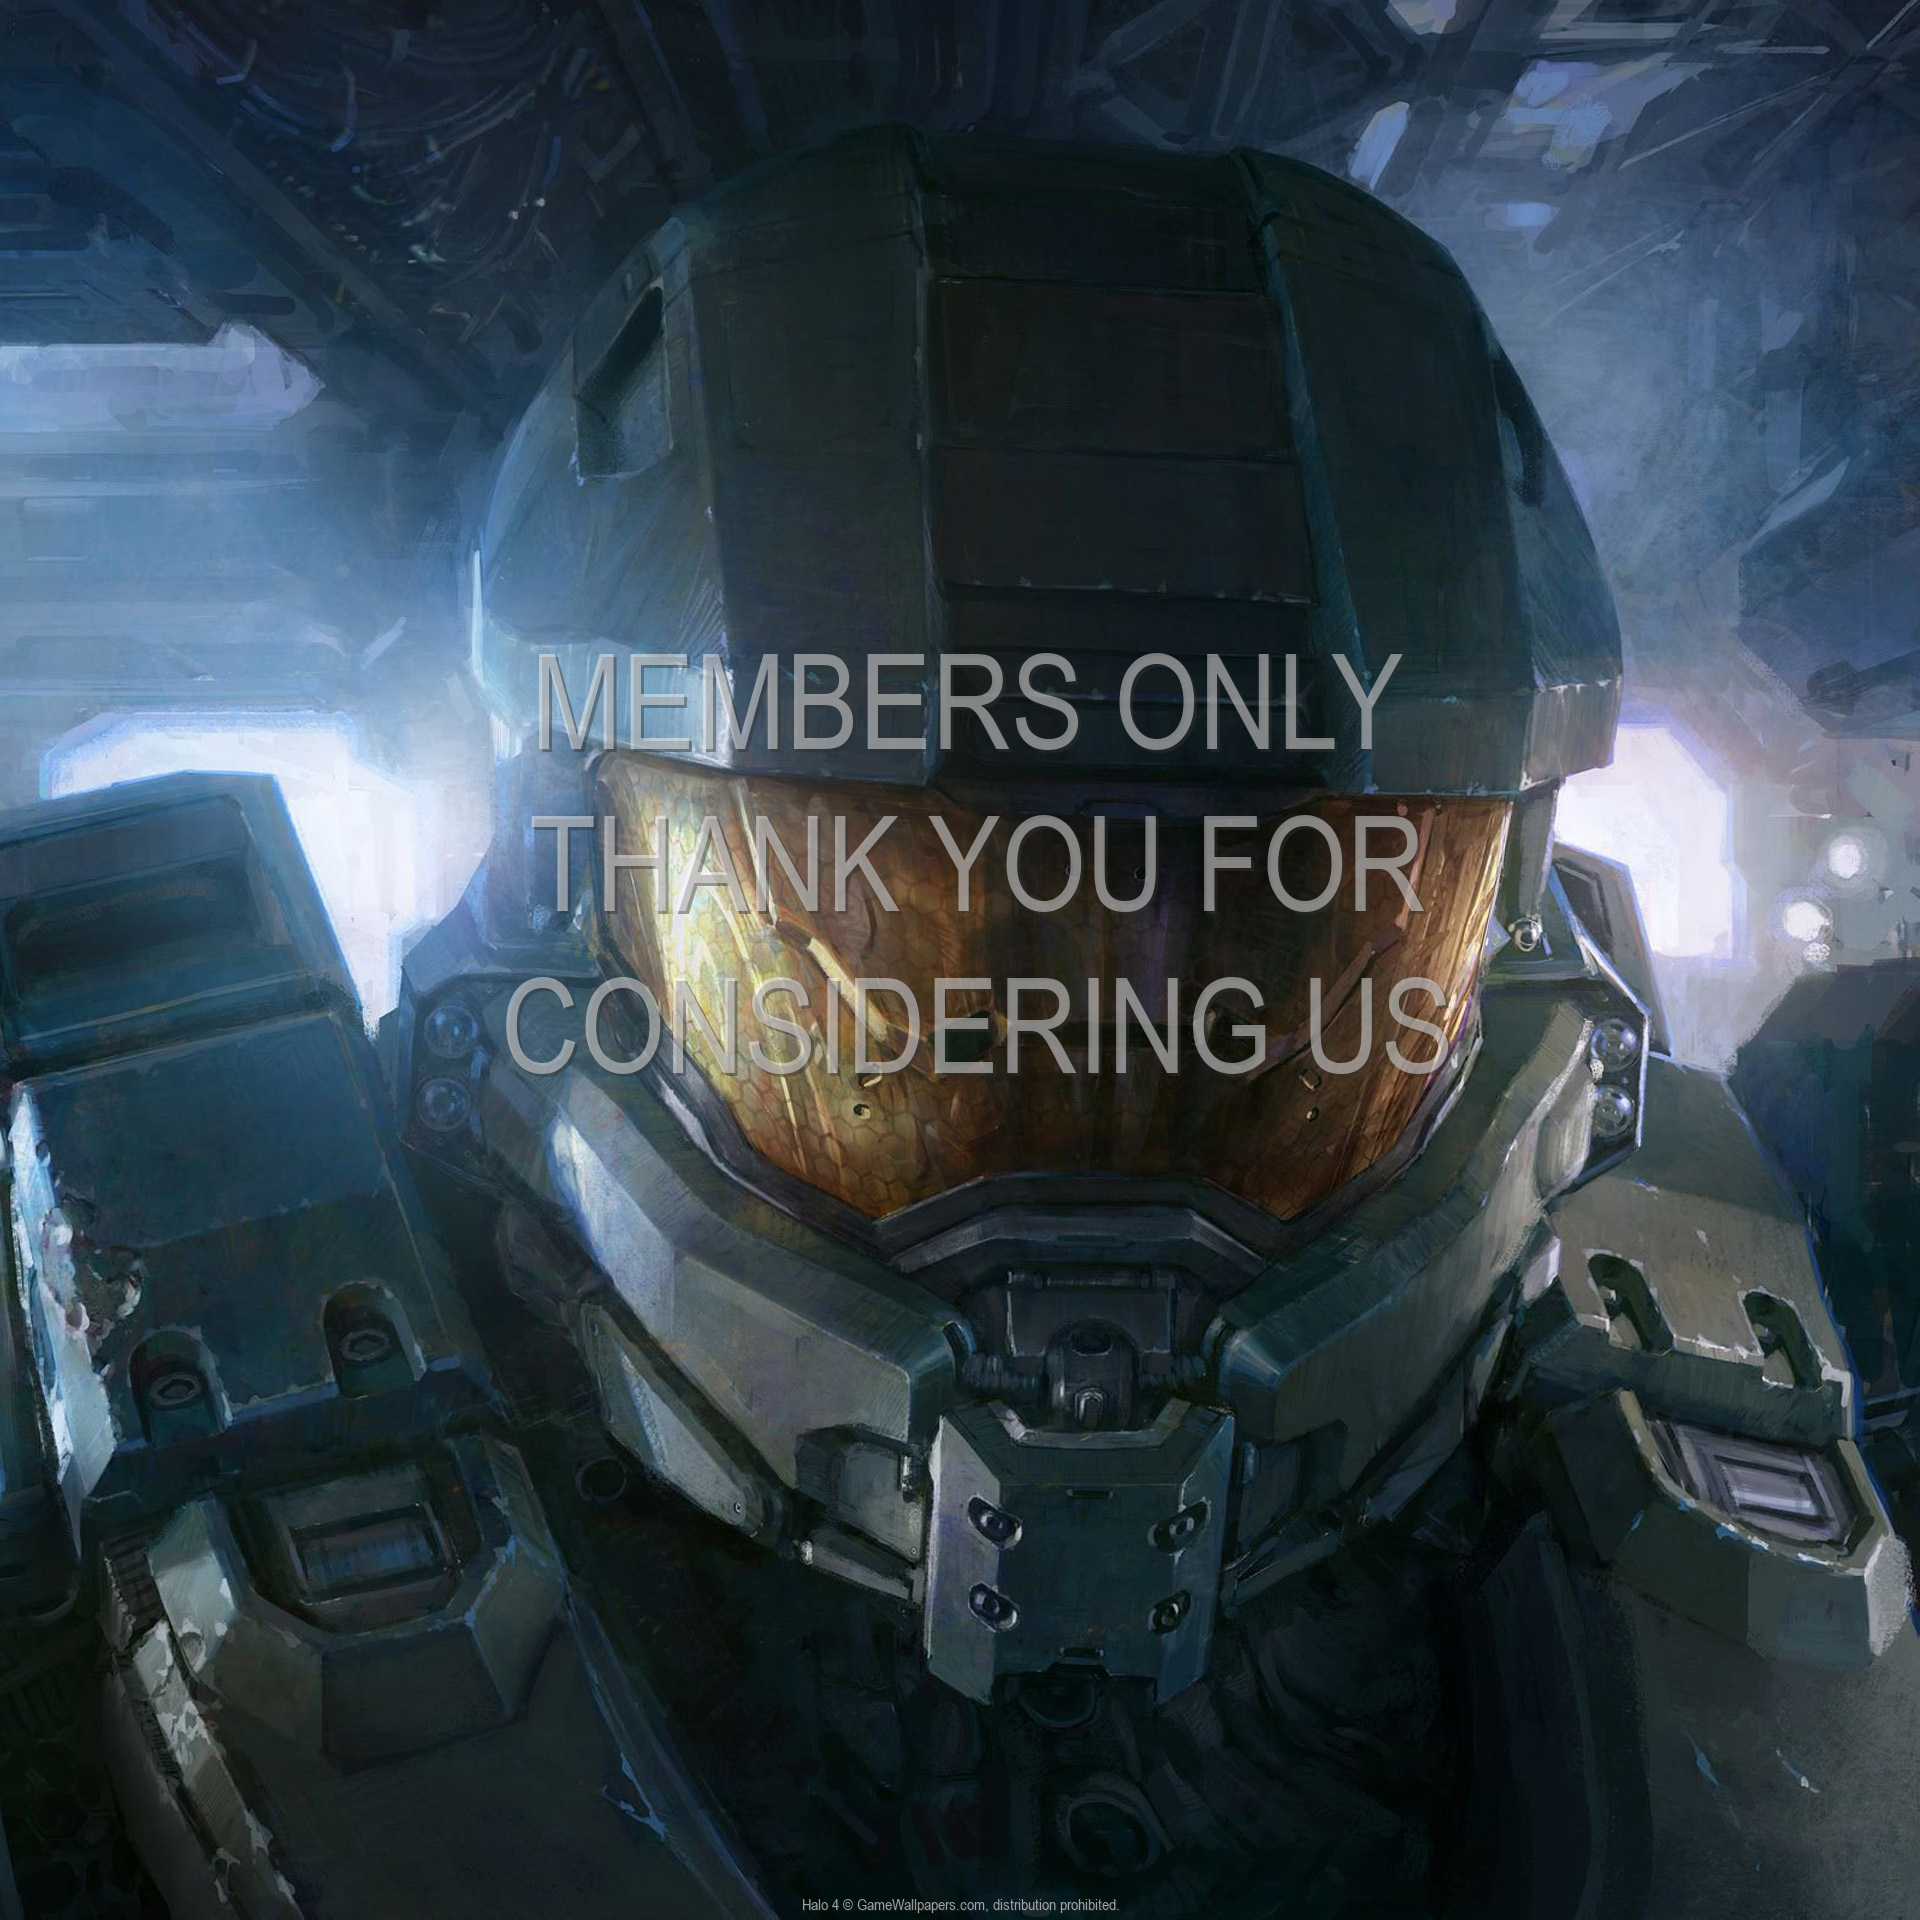 Halo 4 1080p%20Horizontal Mobile wallpaper or background 08